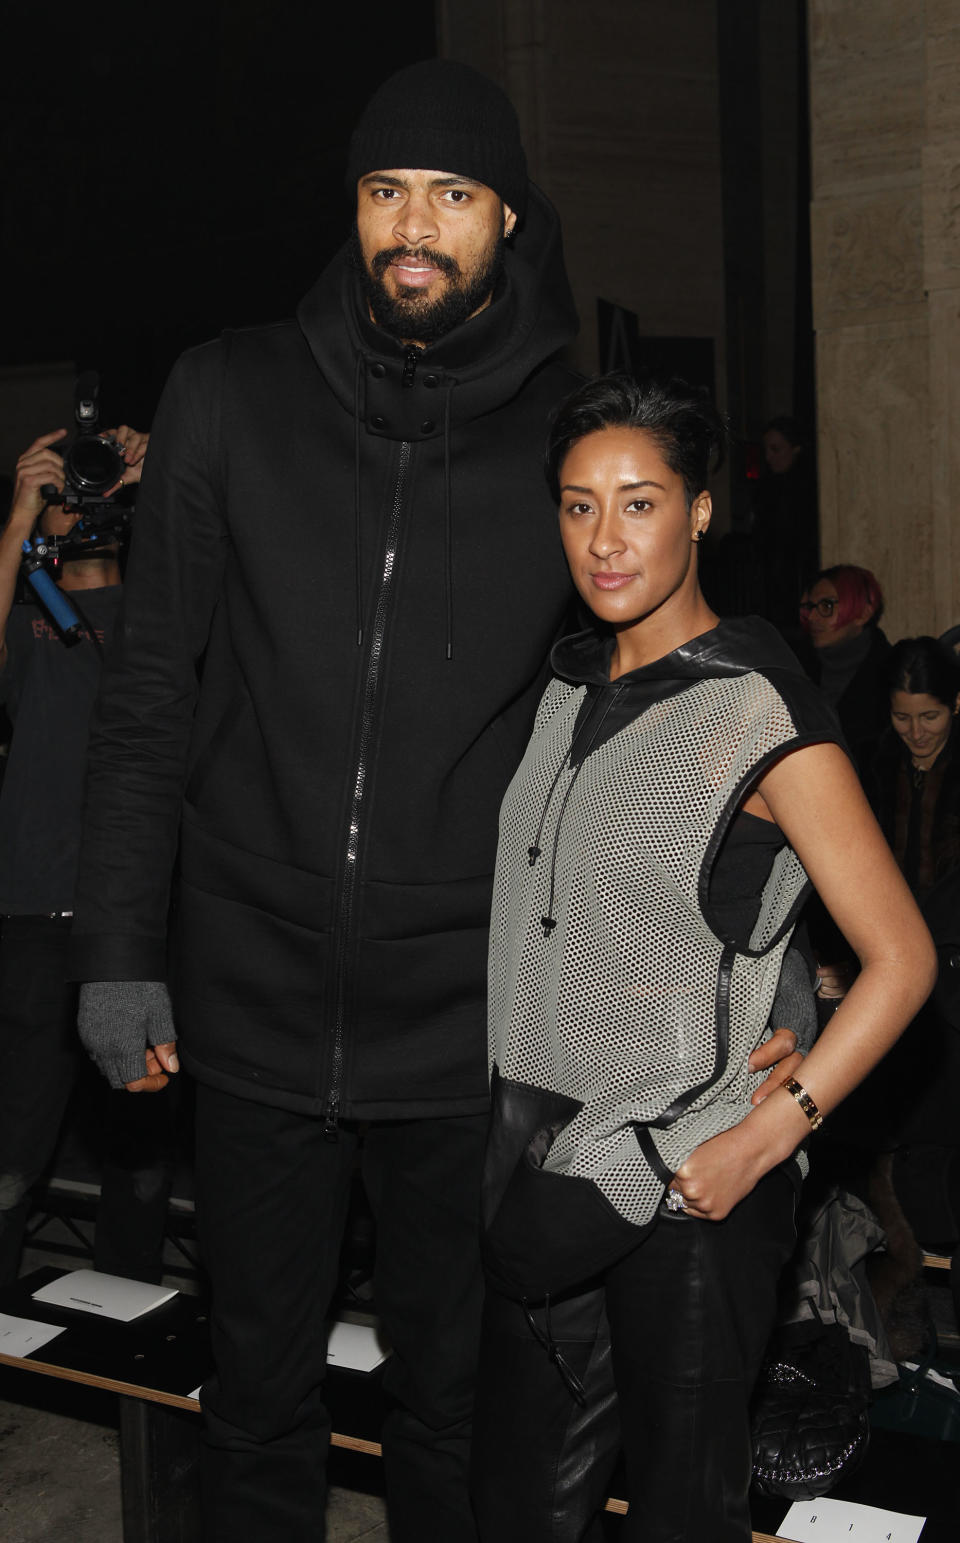 FILE - This Feb. 8, 2013 file photo, NBA star Tyson Chandler and his wife Kim Chandler are seen at the Fall 2013 Alexander Wang Runway Show, in New York. Tall, trim and wearing catwalk clothes: Pro basketball stars have stepped up their style to become influential tastemakers. .Pro player style has been on the upswing for the past decade, especially since the NBA initiated a dress code in 2005, according to observers. (Photo by Amy Sussman/Invision/AP, file)